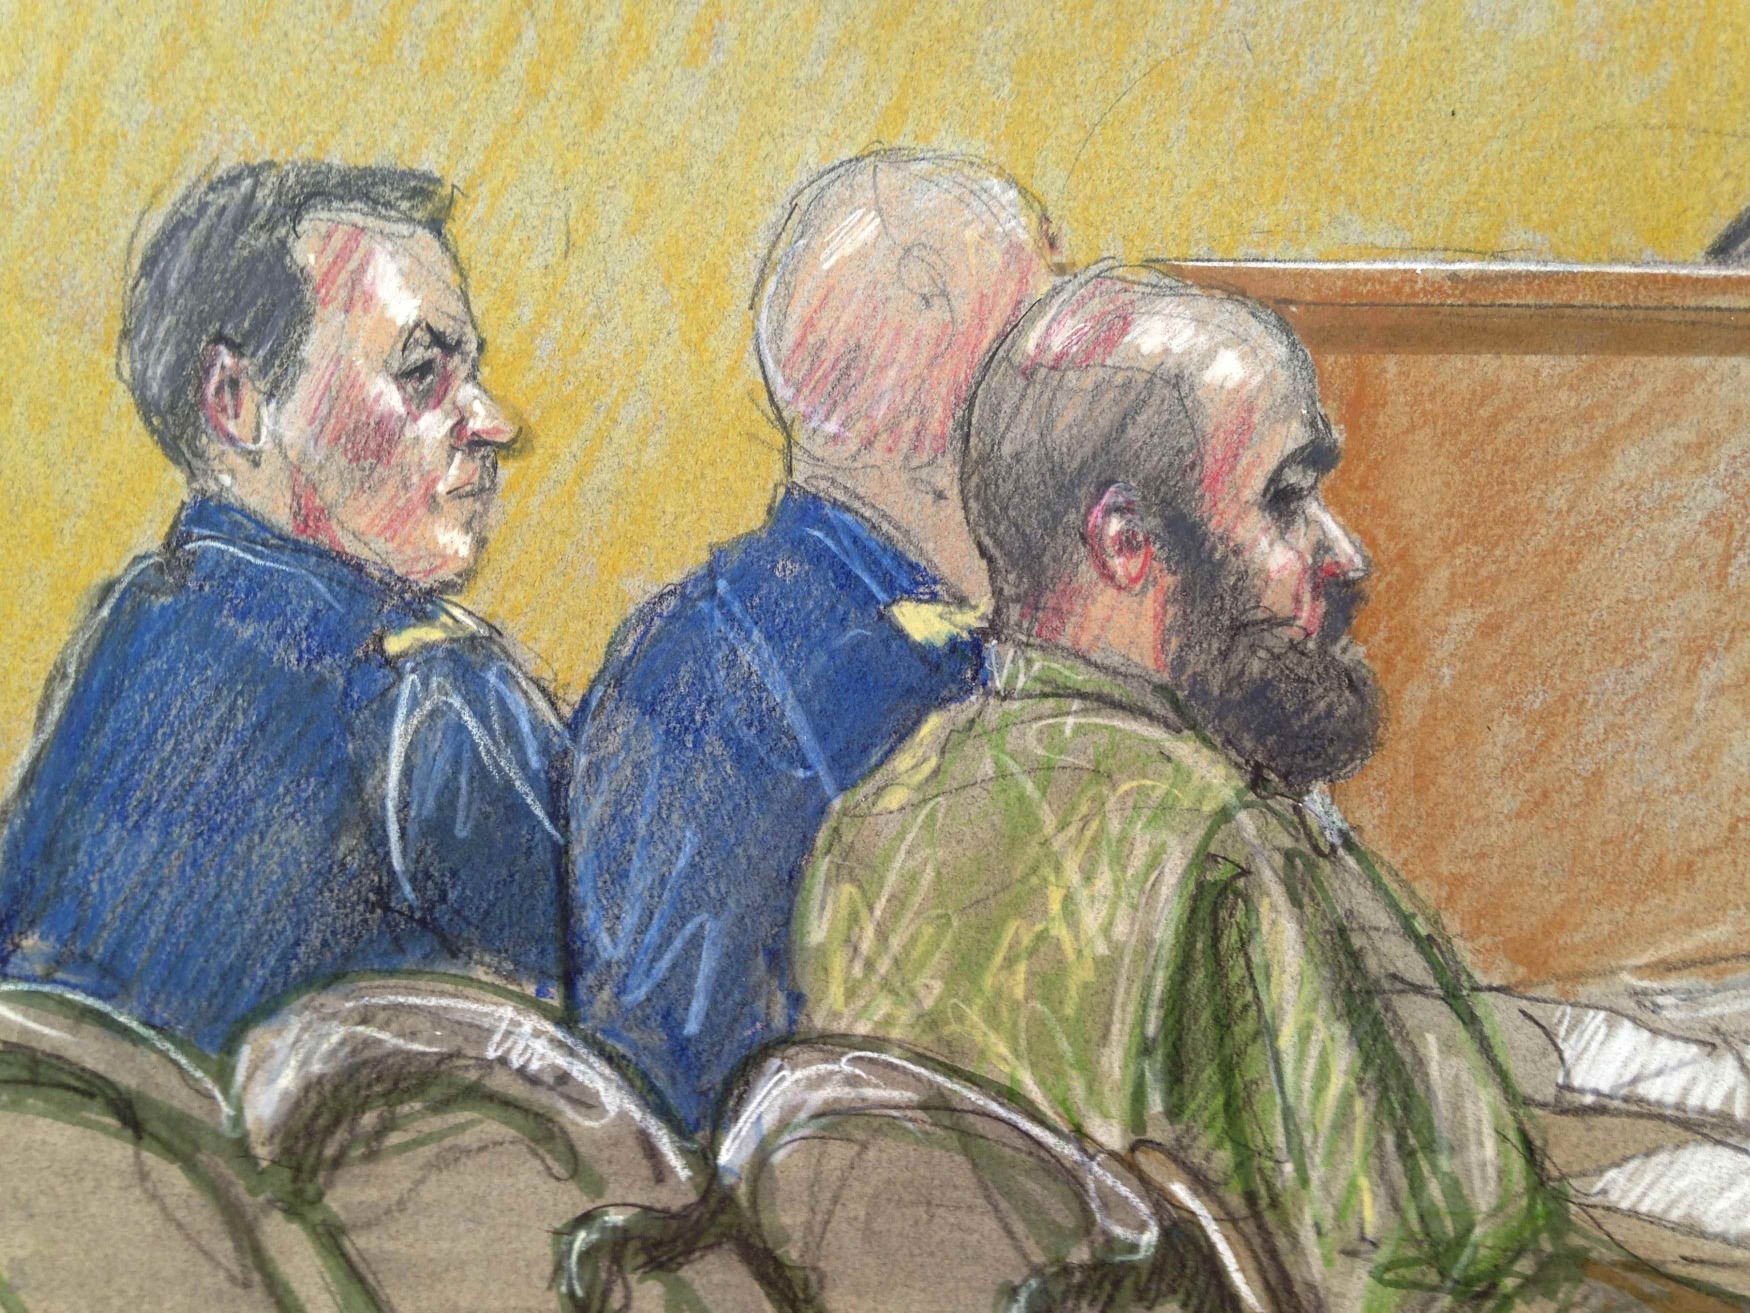 US Army Major Nidal Hasan (right), accused of killing 13 soldiers in a 2009 Fort Hood shooting rampage, is seen in a courtroom sketch during at Fort Hood in Texas. Photo: Reuters